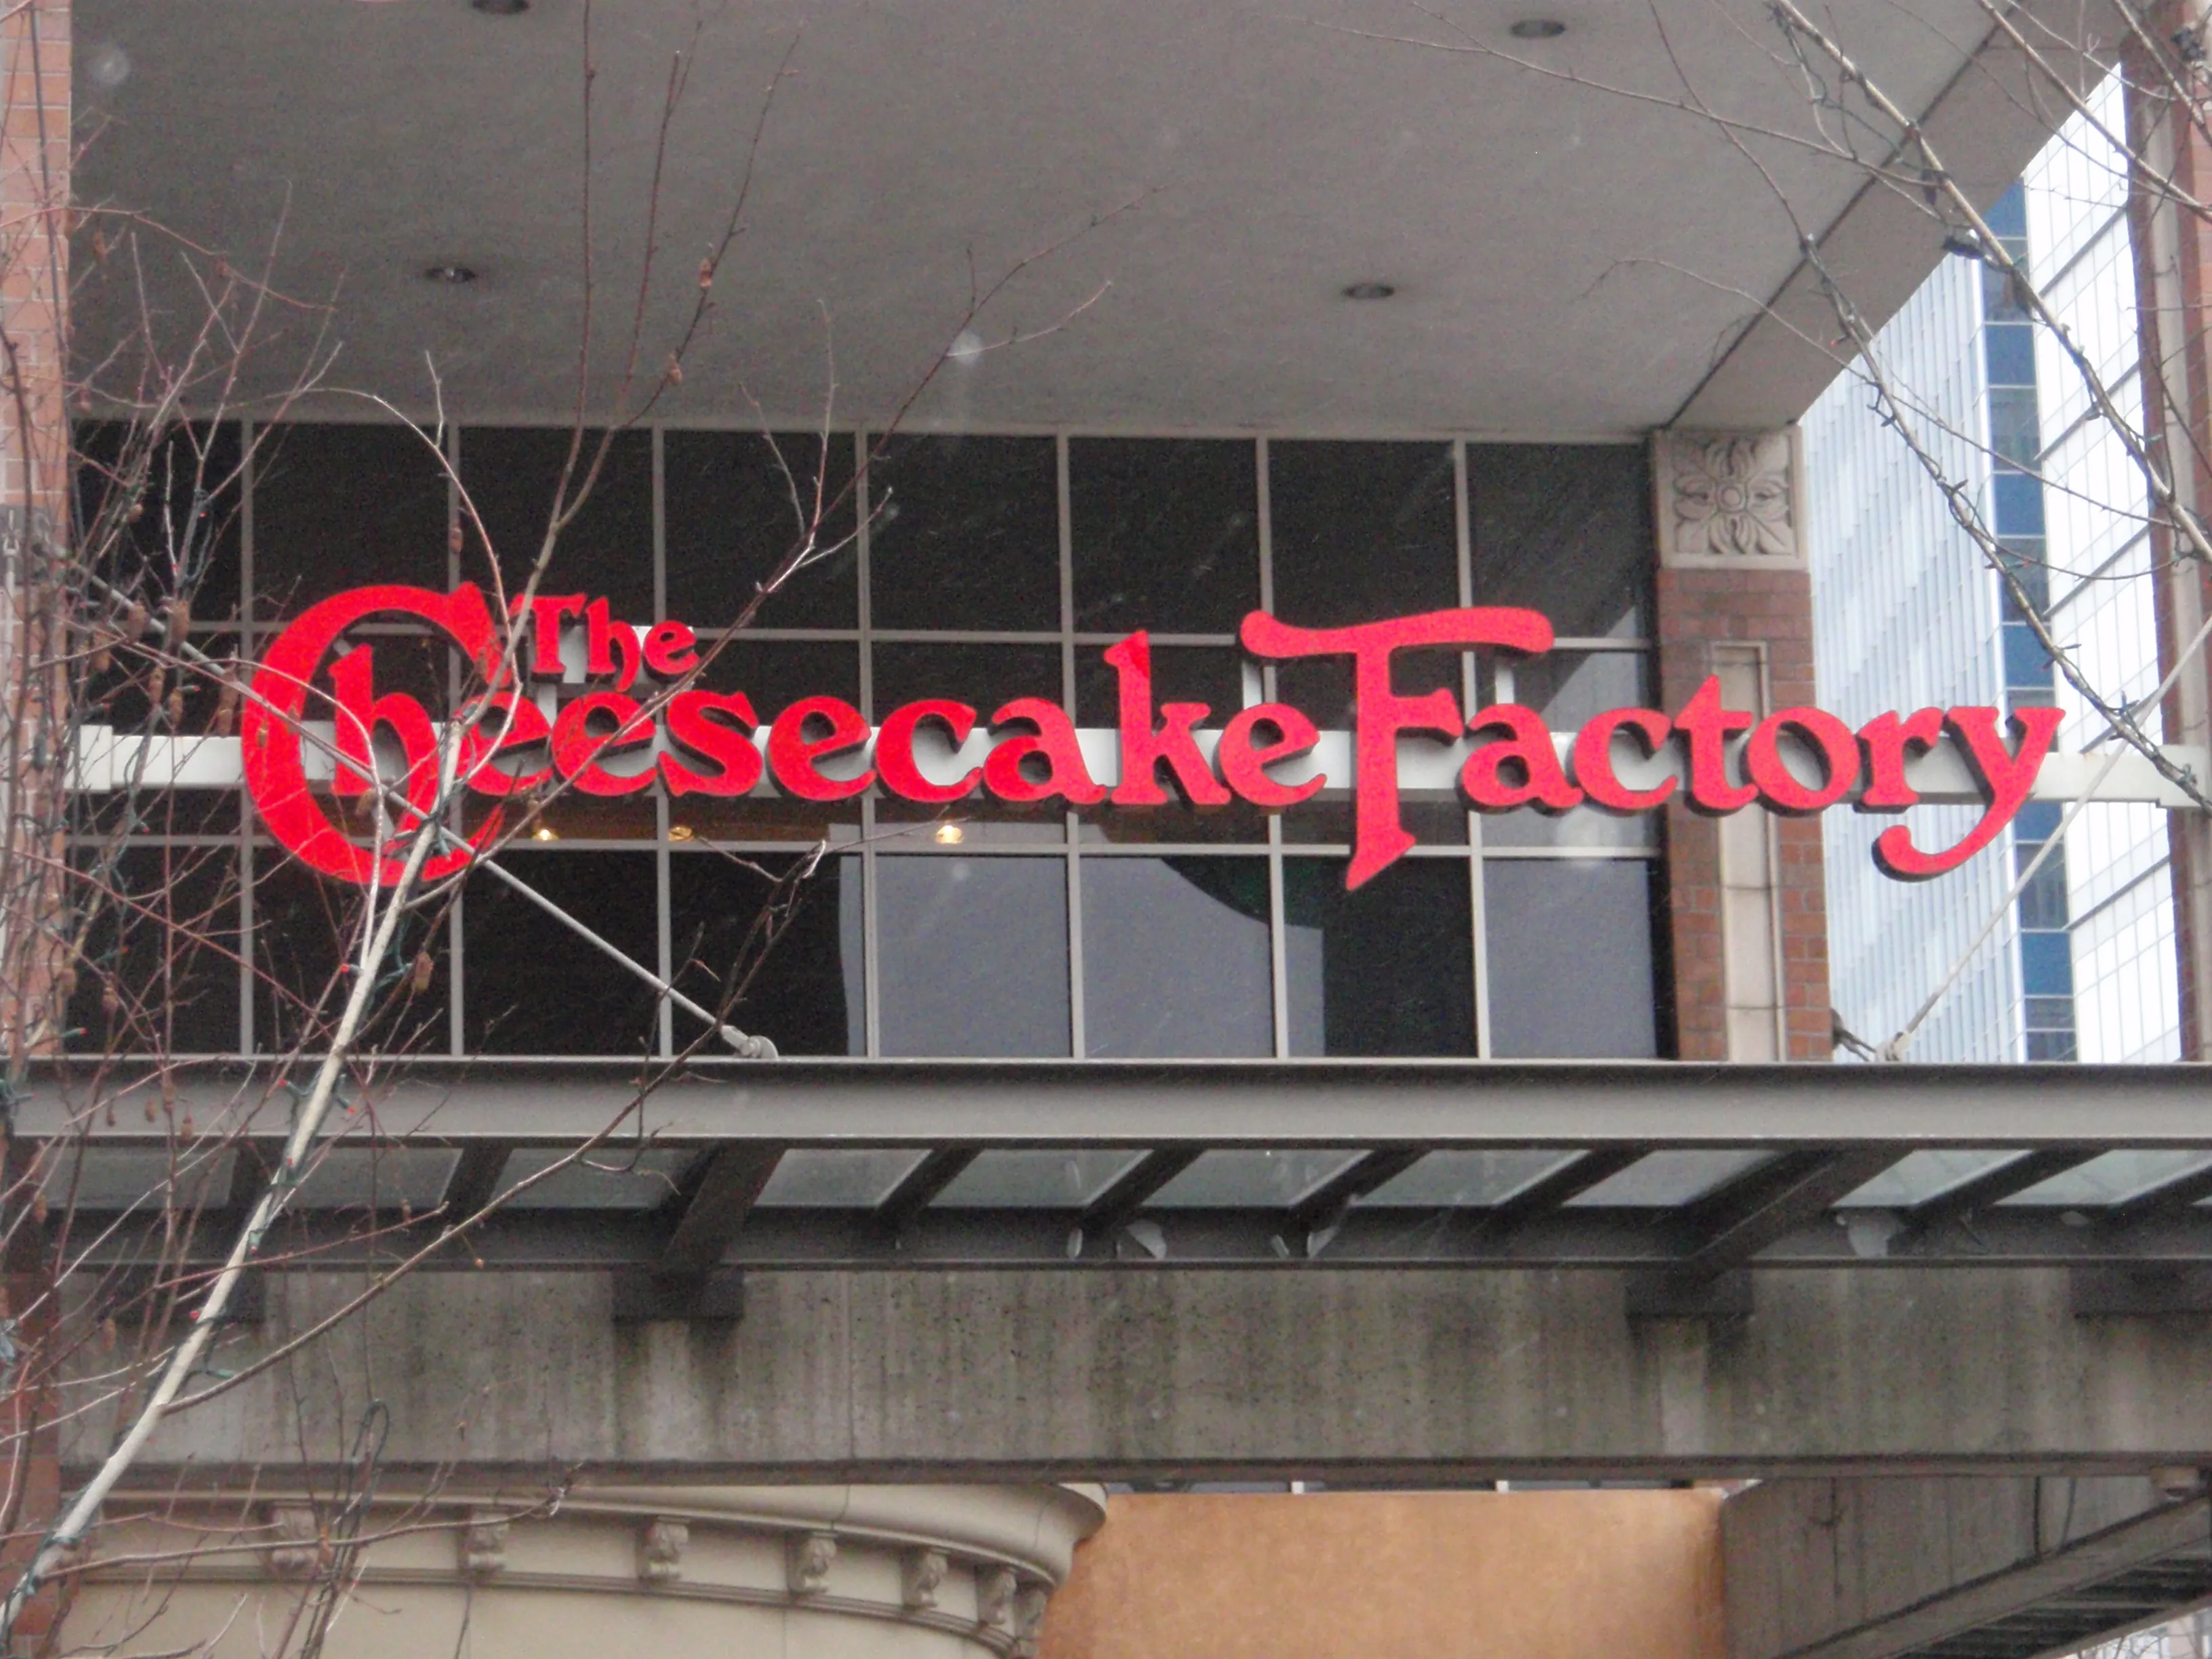 A photograph shows a large Cheesecake Factory sign hanging above the entryway of a building.